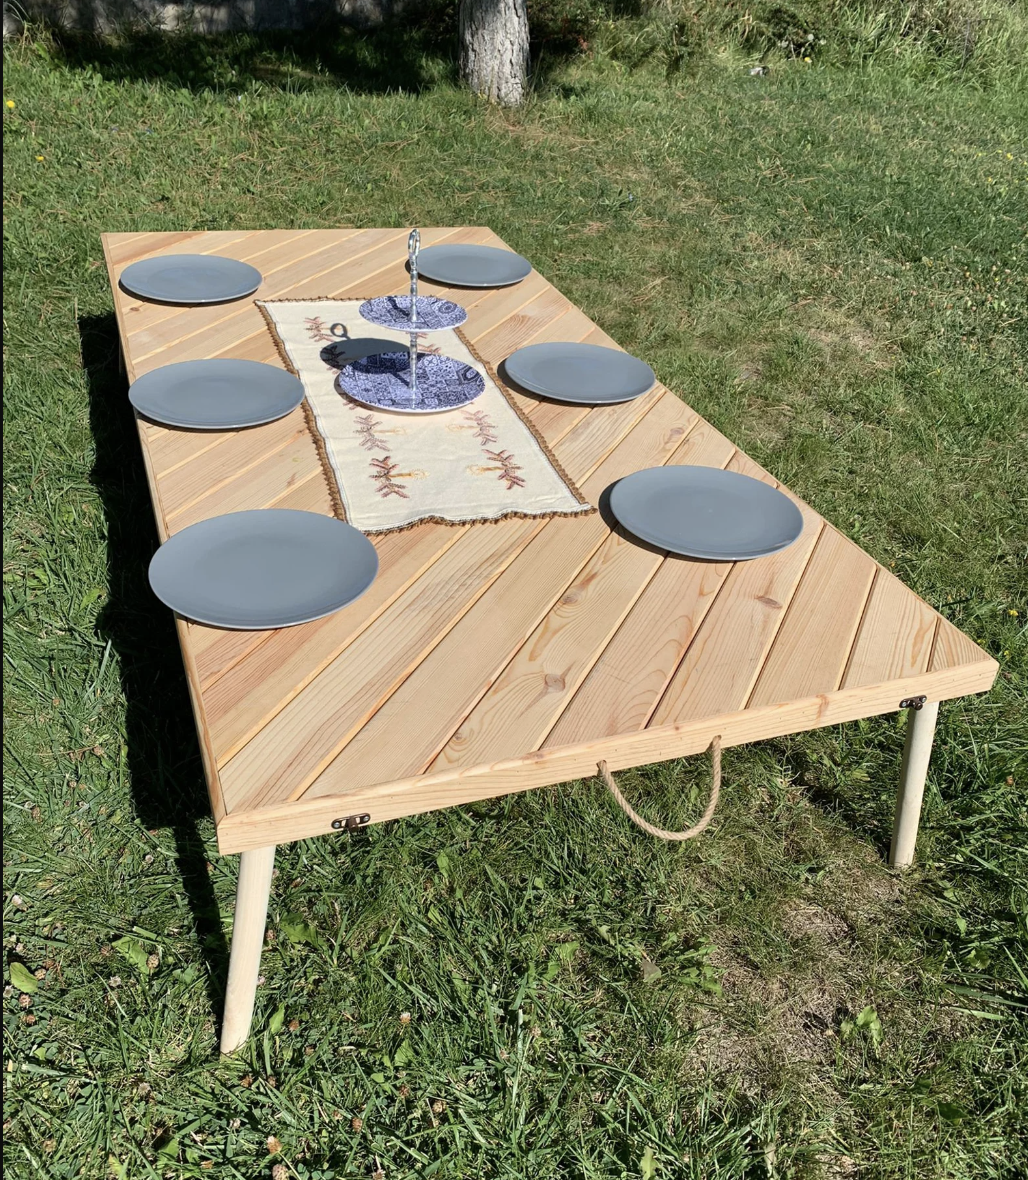 A low wooden picnic table is shown outside on grass